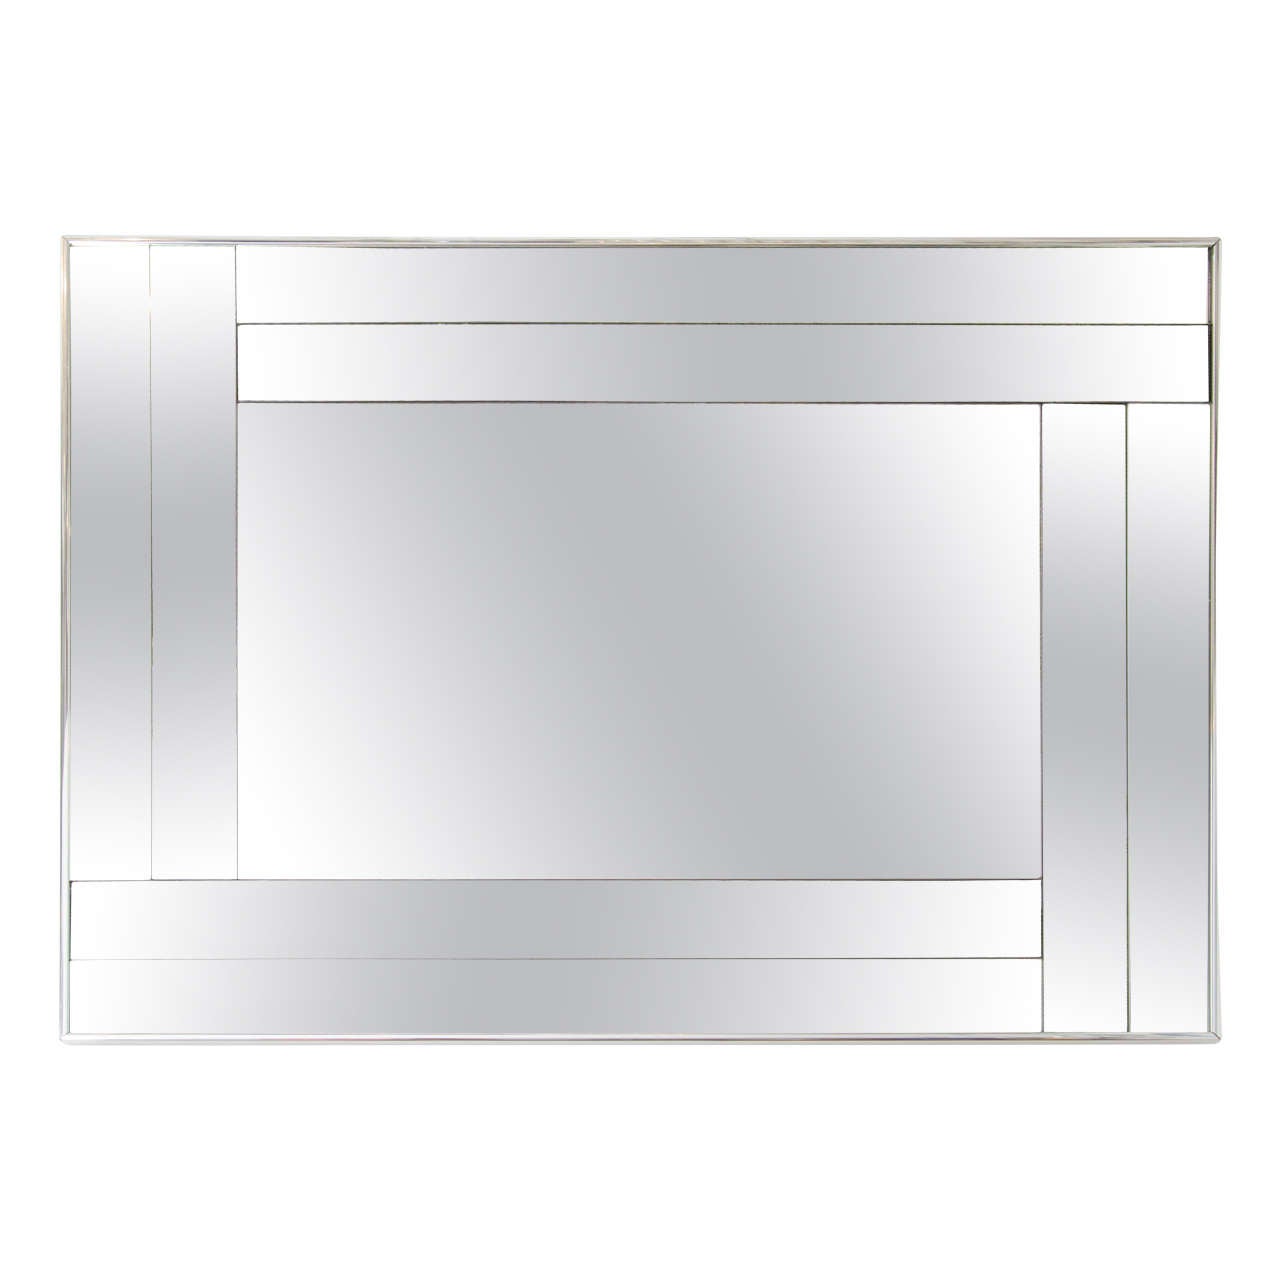 '70s Modern Wall Mirror with Smoked Glass Design, 1970s